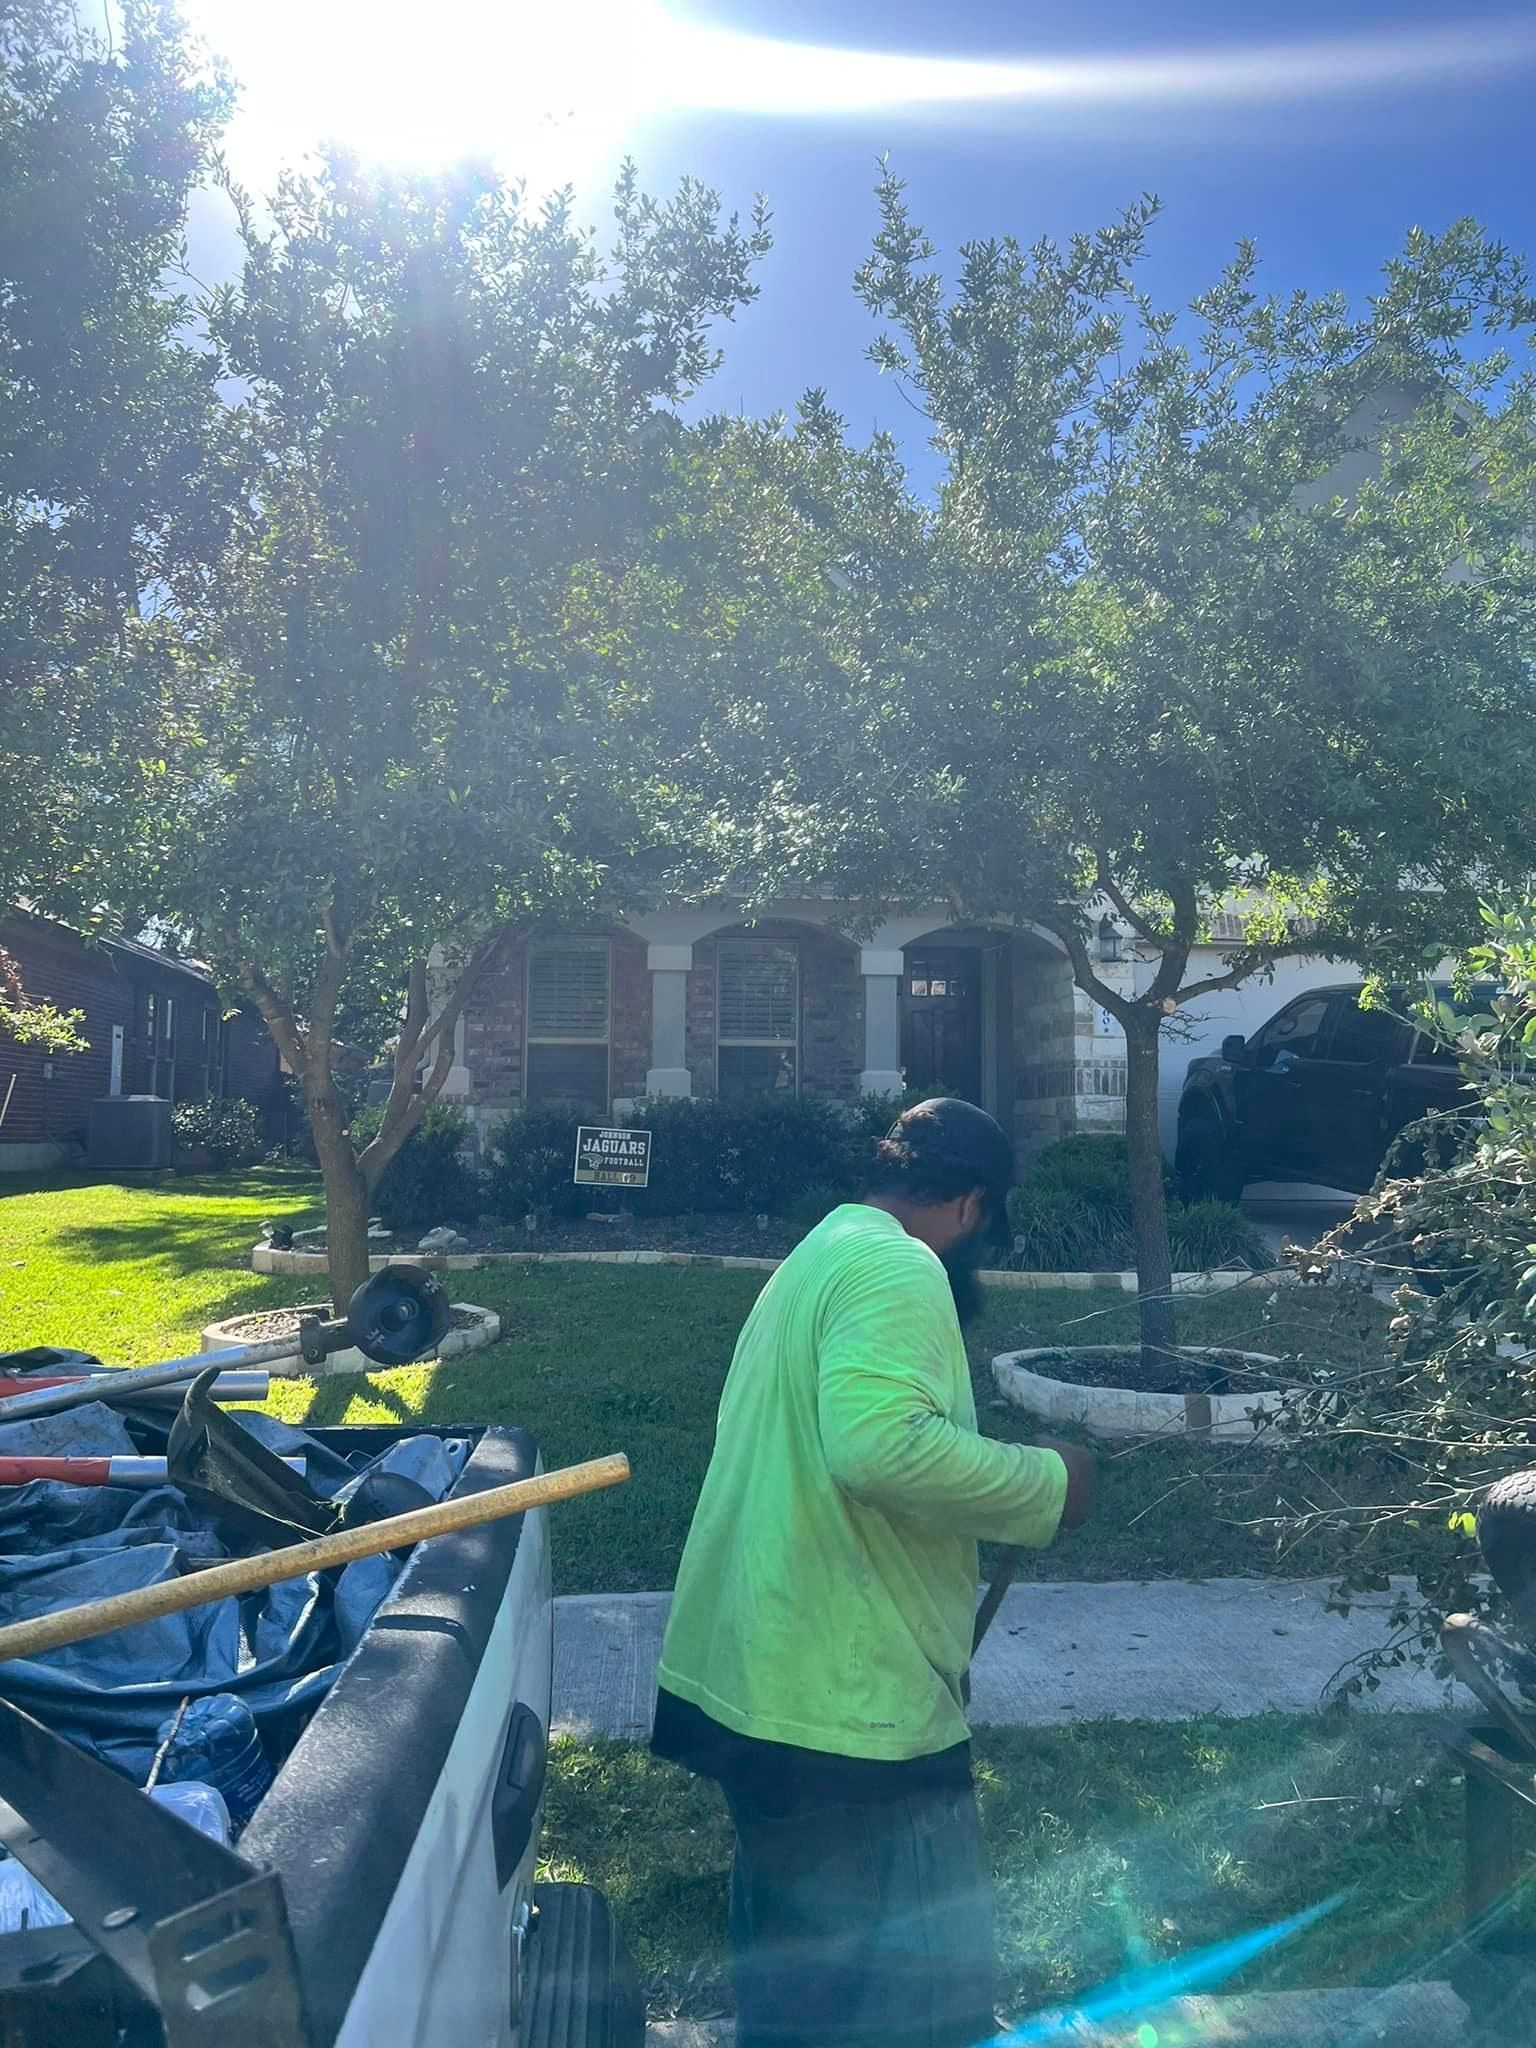 Trash Removal for Green Turf Landscaping in Kyle, TX